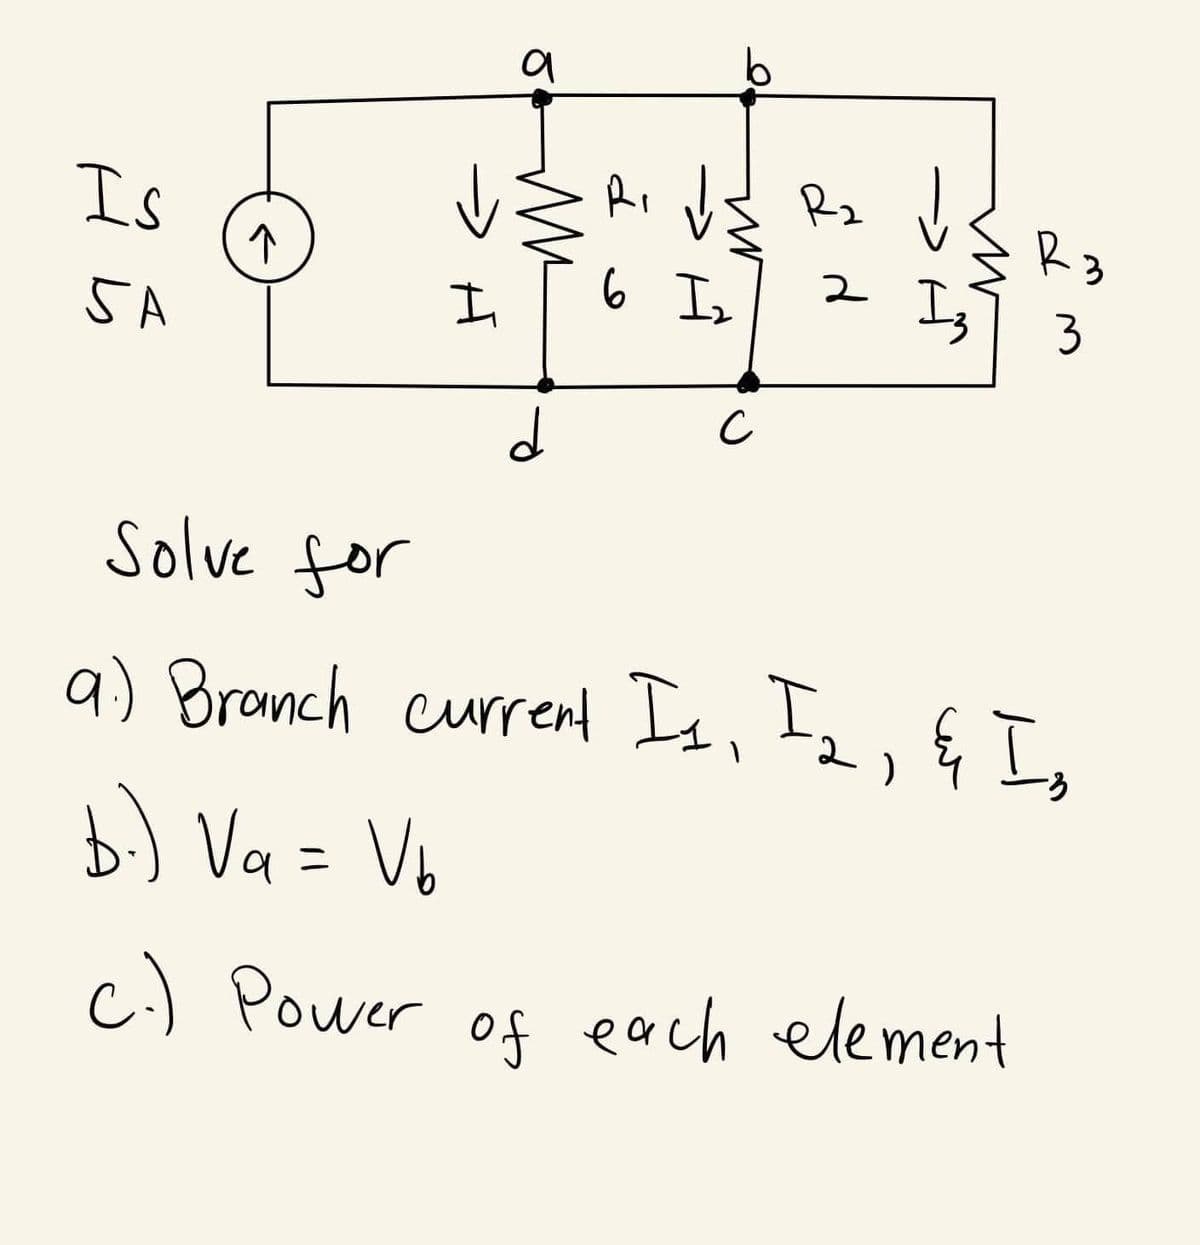 Is
5A
↑
a
Ri
R₂
분류할 수
I
6 I ₂
d
с
d
Iz
R3
3
Solve for
a) Branch current Is, I2, & Is
b.) Va = Vb
c.) Power of each element